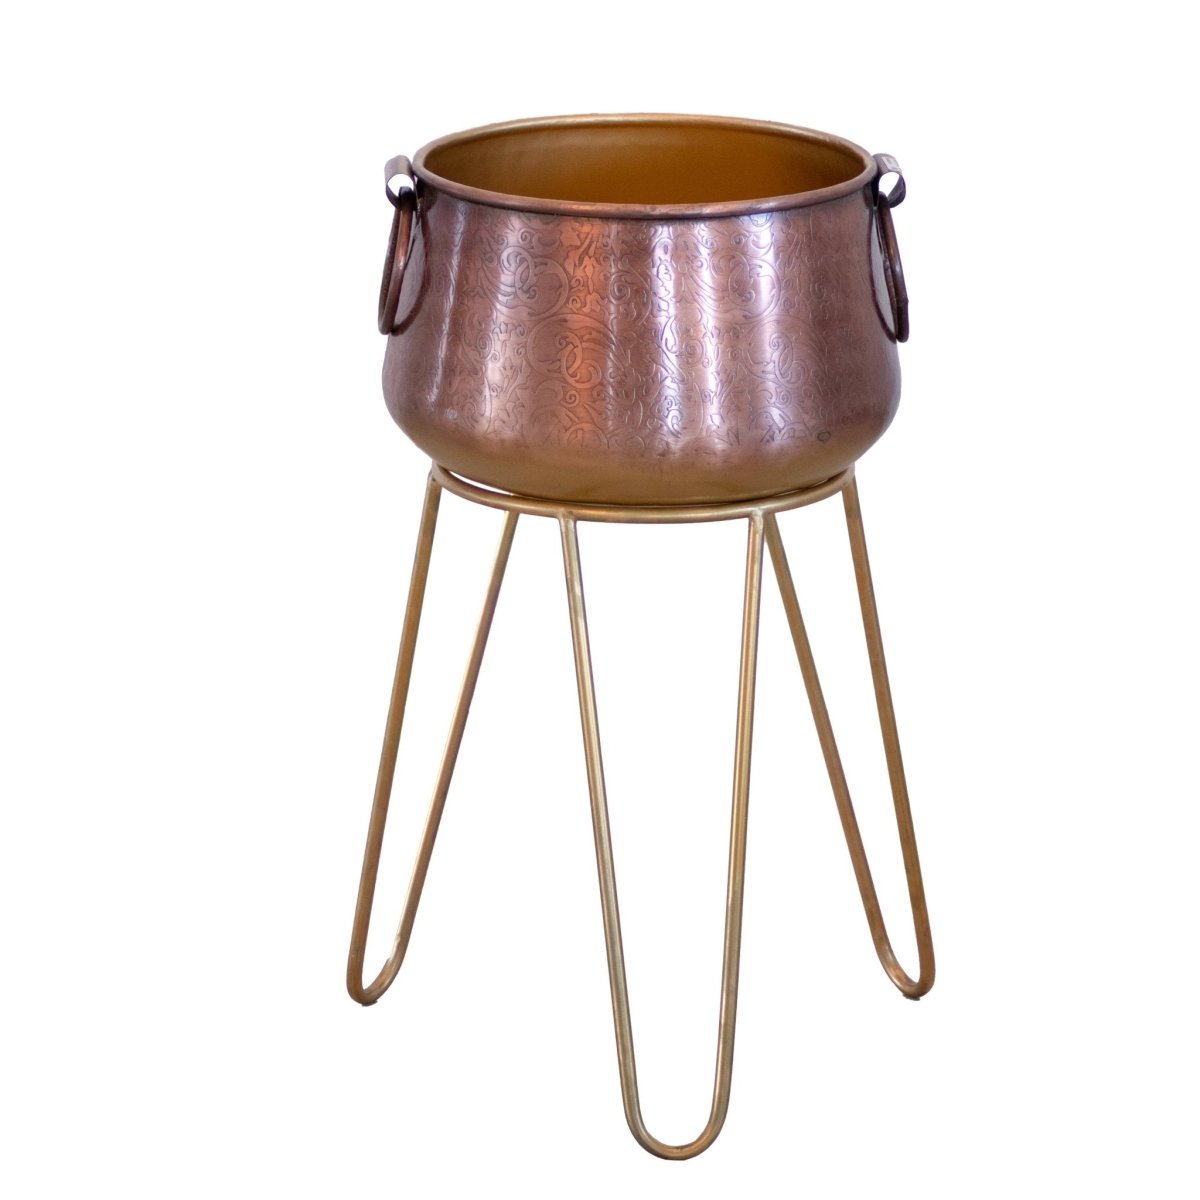 Kezevel Metal Planter with Stand - Handcrafted Antique Copper and Gold Plant Pot Holder, Indoor Planter Pot for Home Decor Size Big / Small - Kezevel